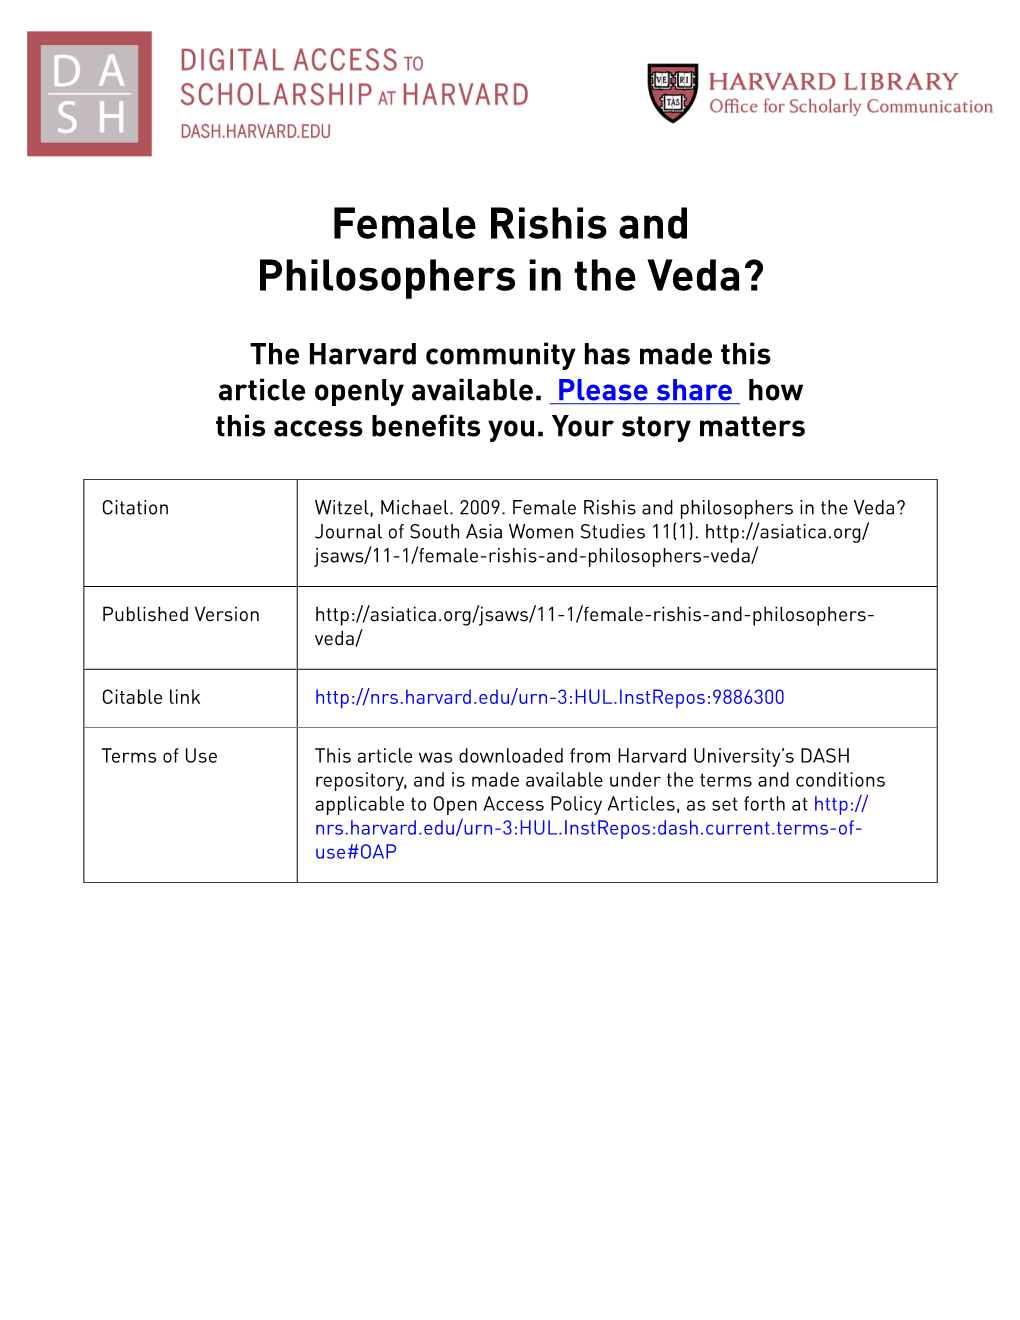 Female Rishis and Philosophers in the Veda?